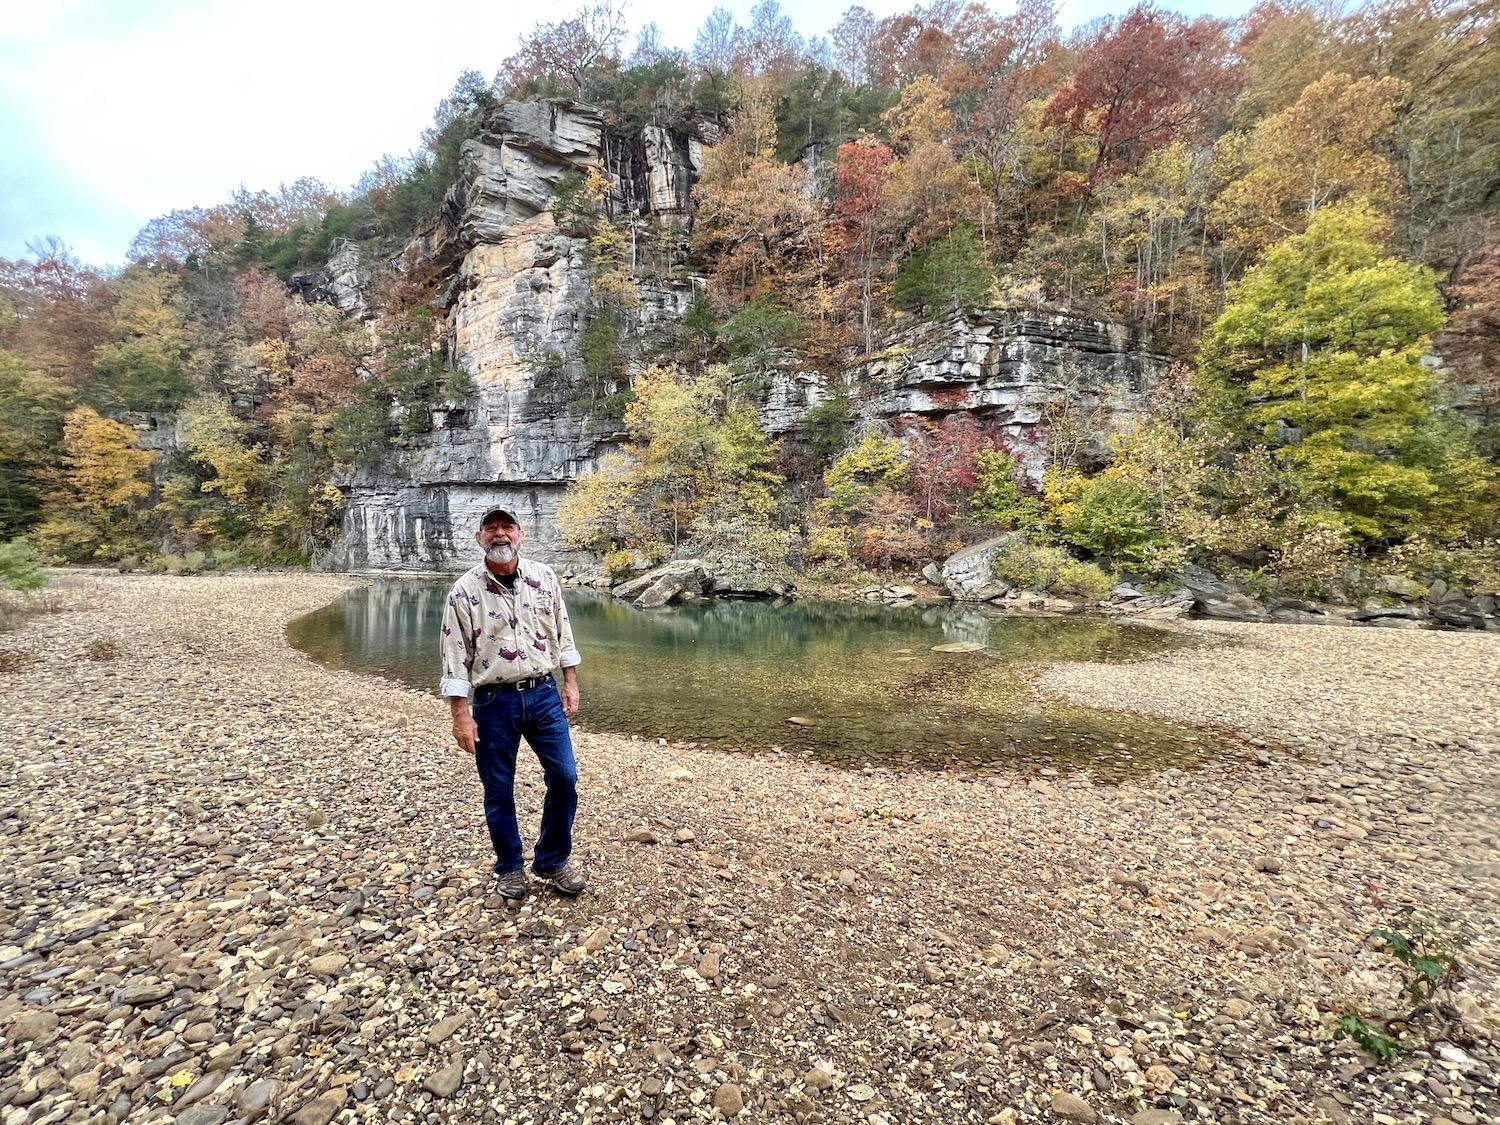 Buffalo Outdoor Center founder Mike Mills stands by the water near Steel Creek Campground in the Buffalo National River.